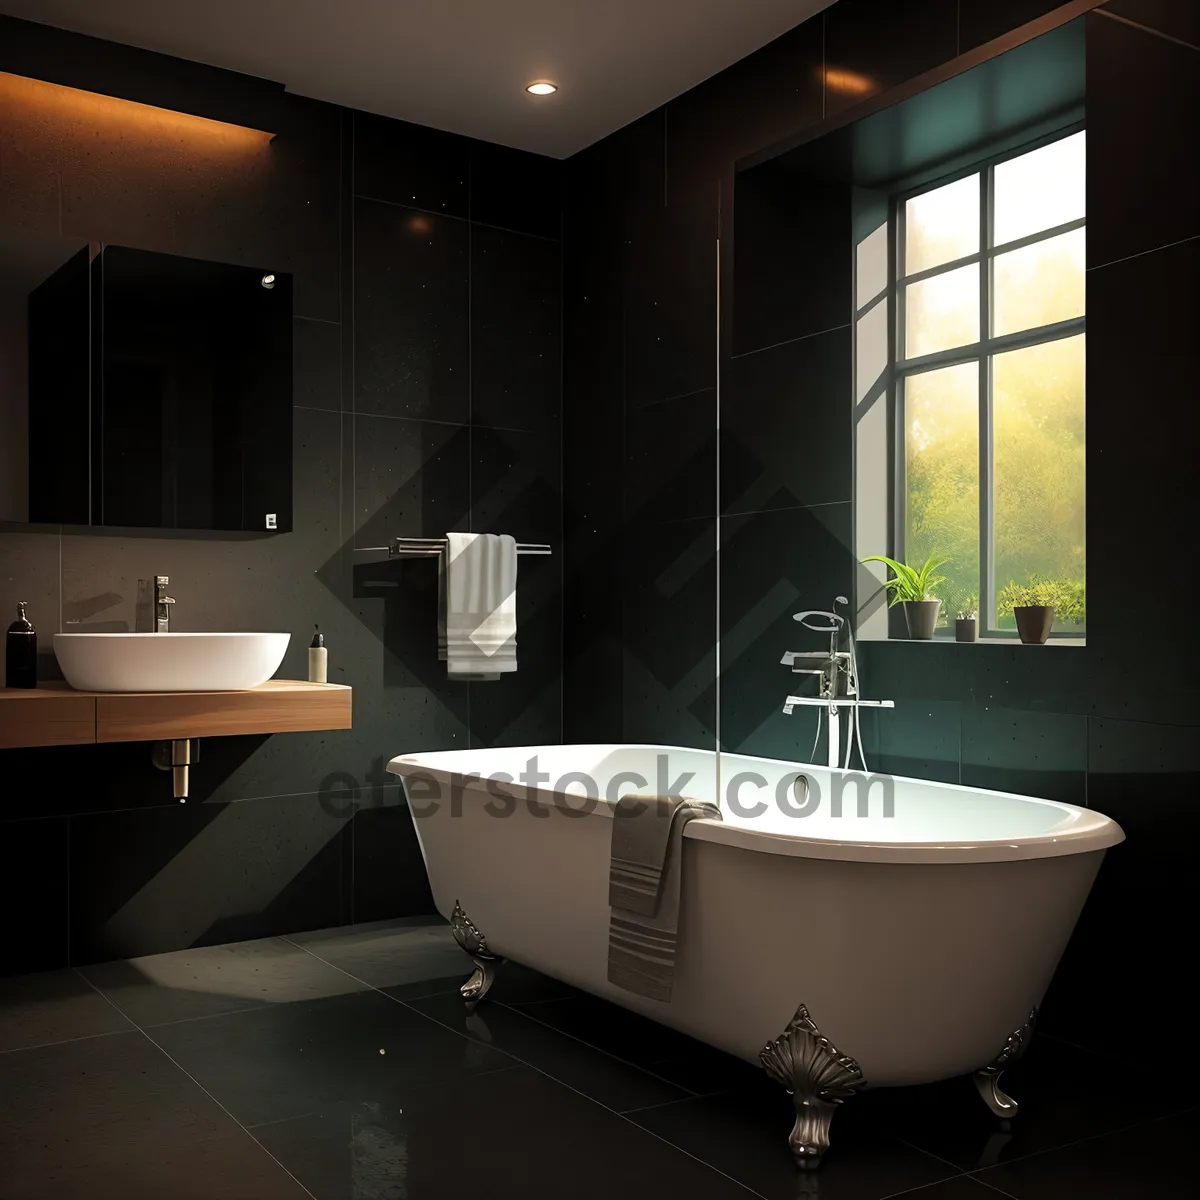 Picture of Modern luxury bathroom with clean and elegant decor